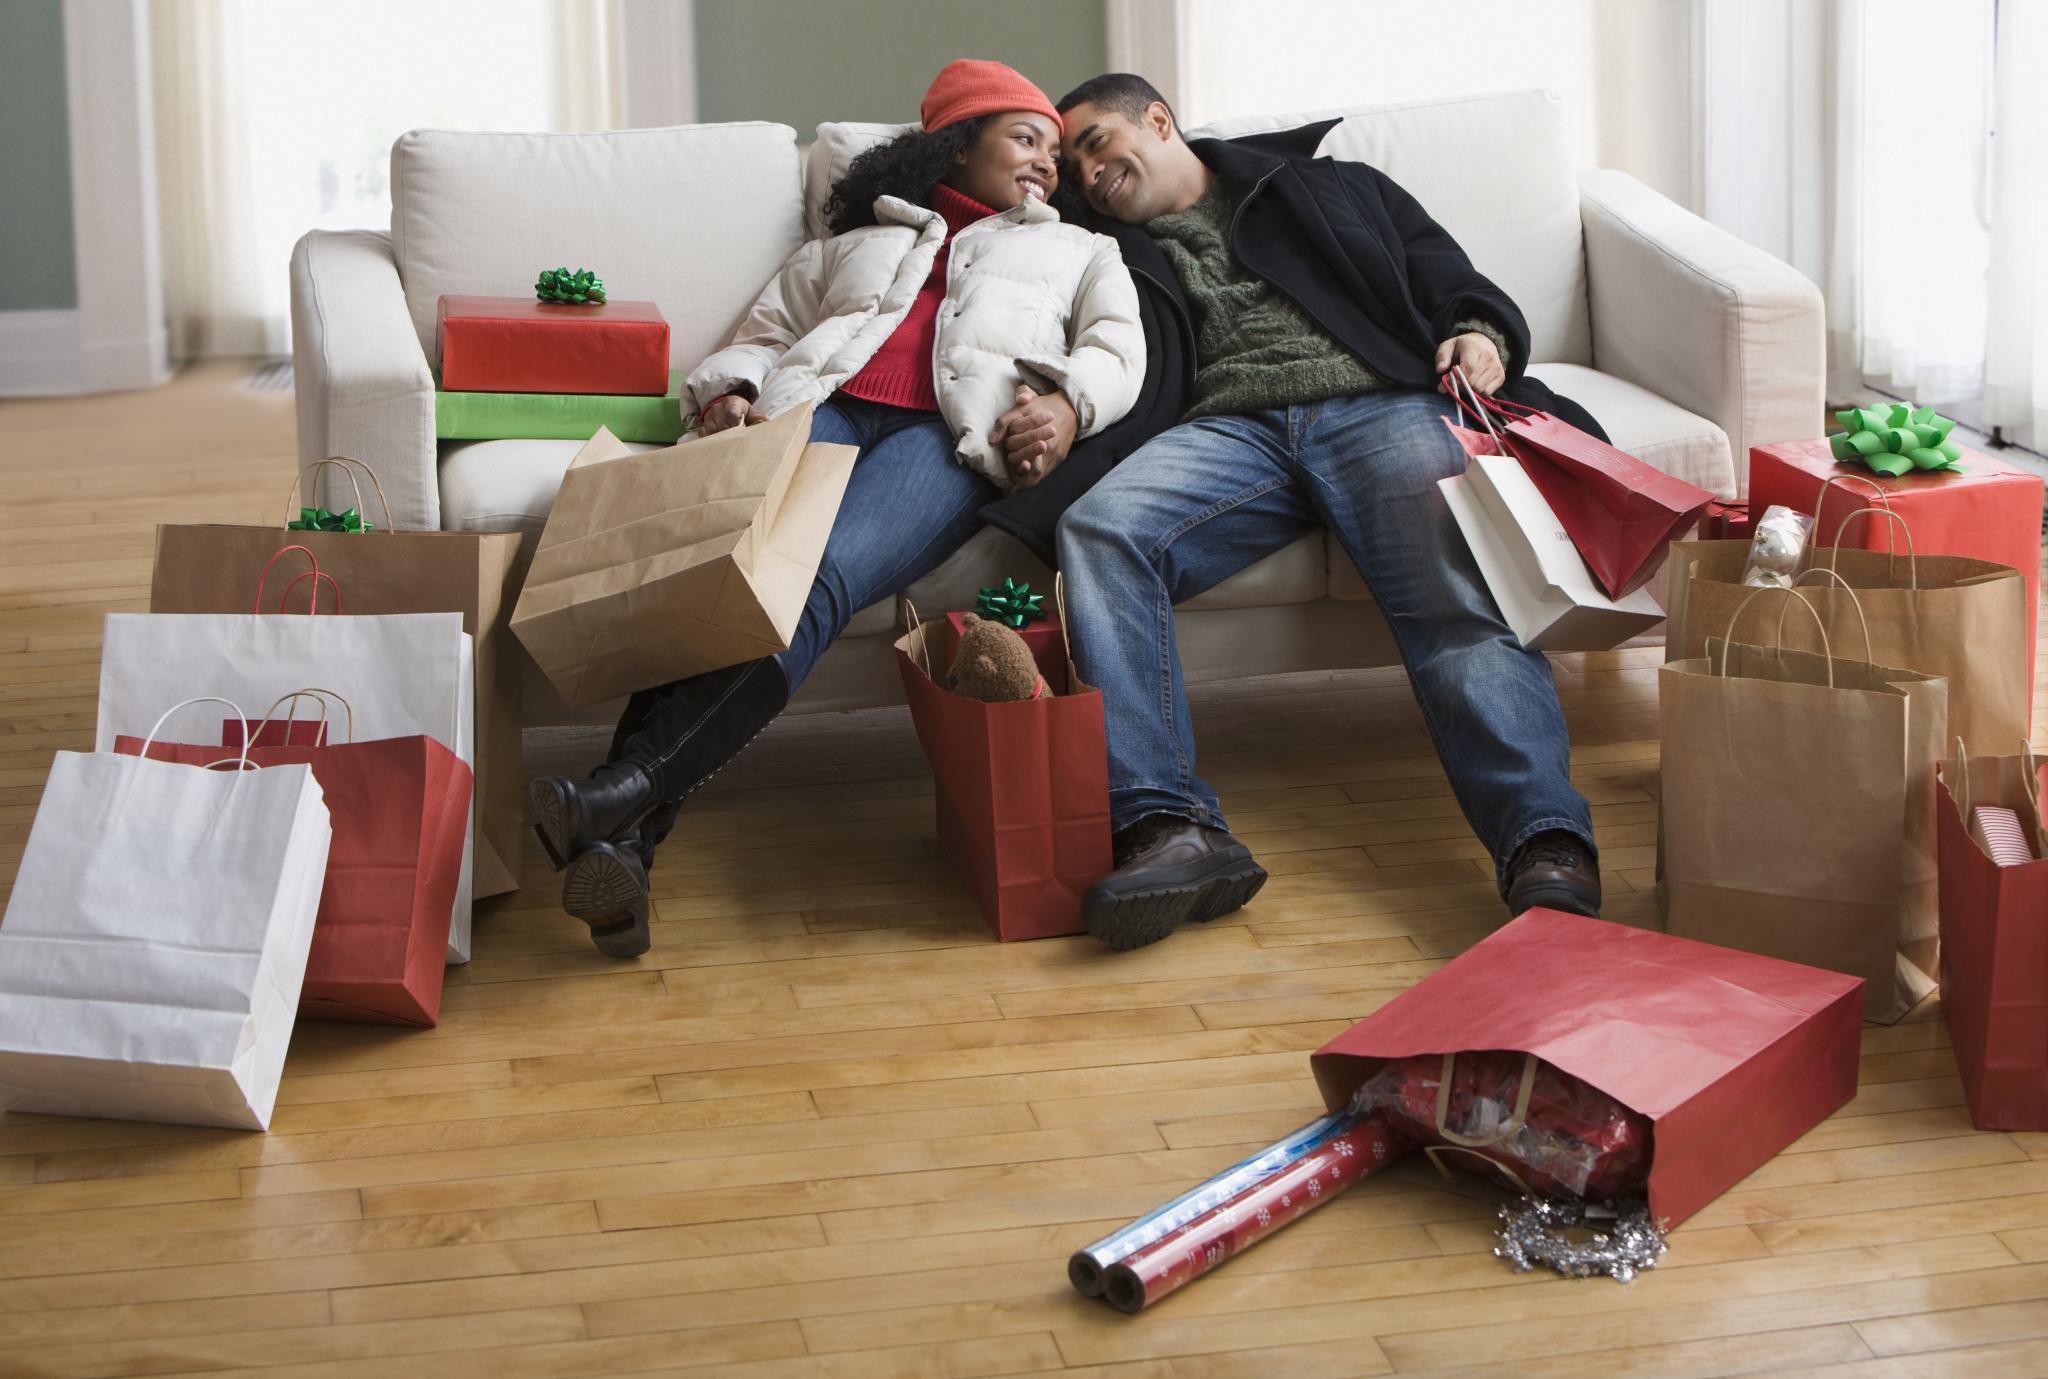 What Kind of Holiday Shopper Are You?